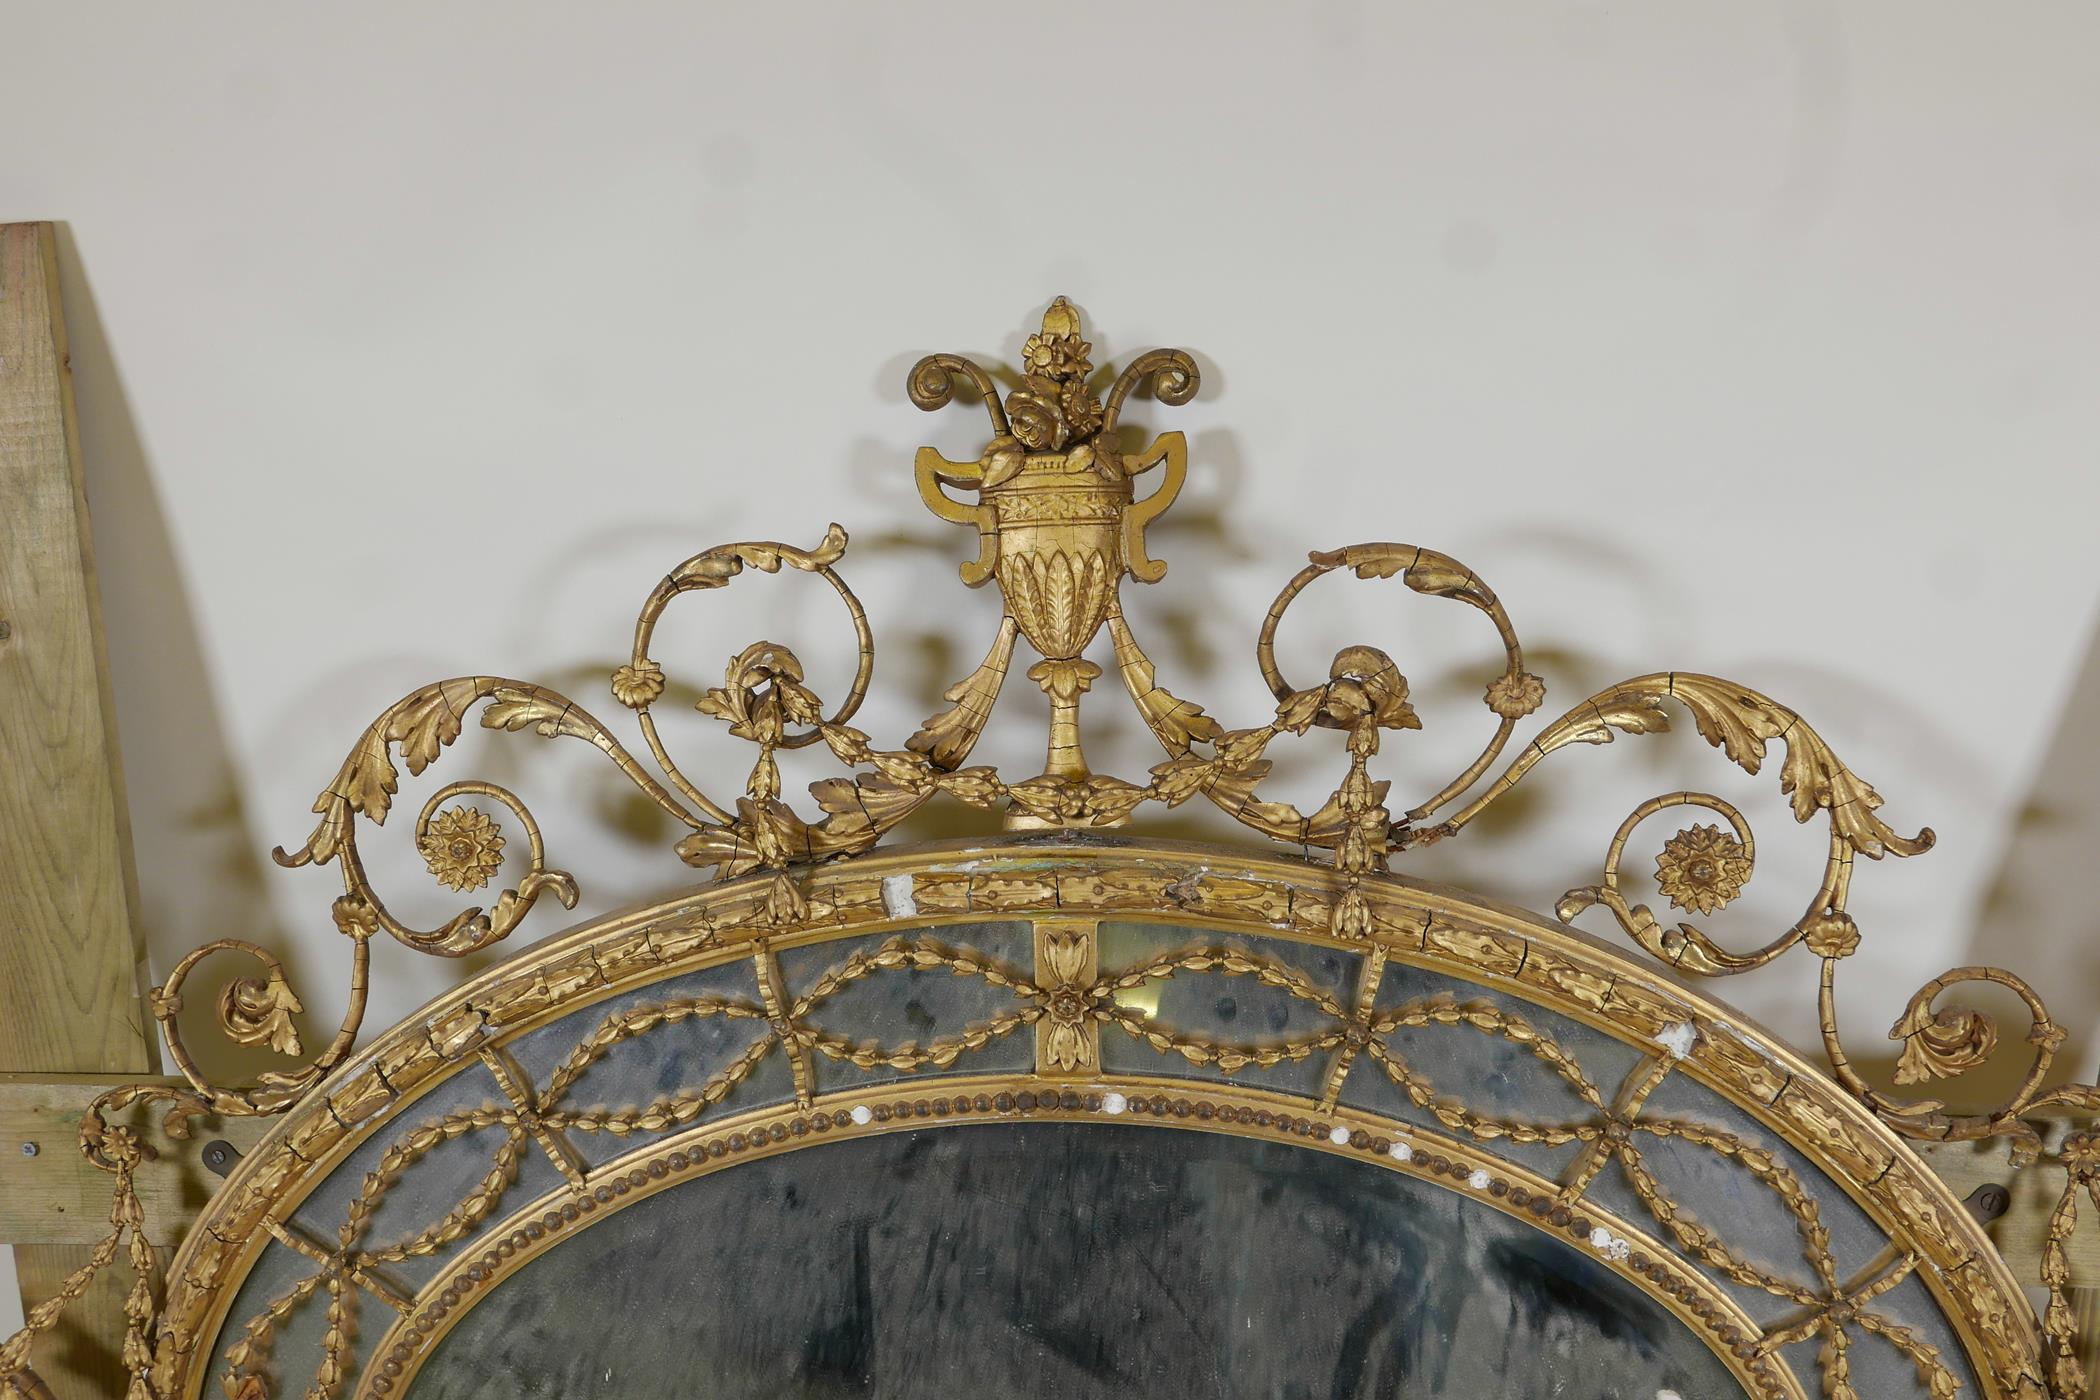 A C19th Adam style giltwood and composition sectional hall mirror, A/F, 60" x 46" - Image 5 of 7